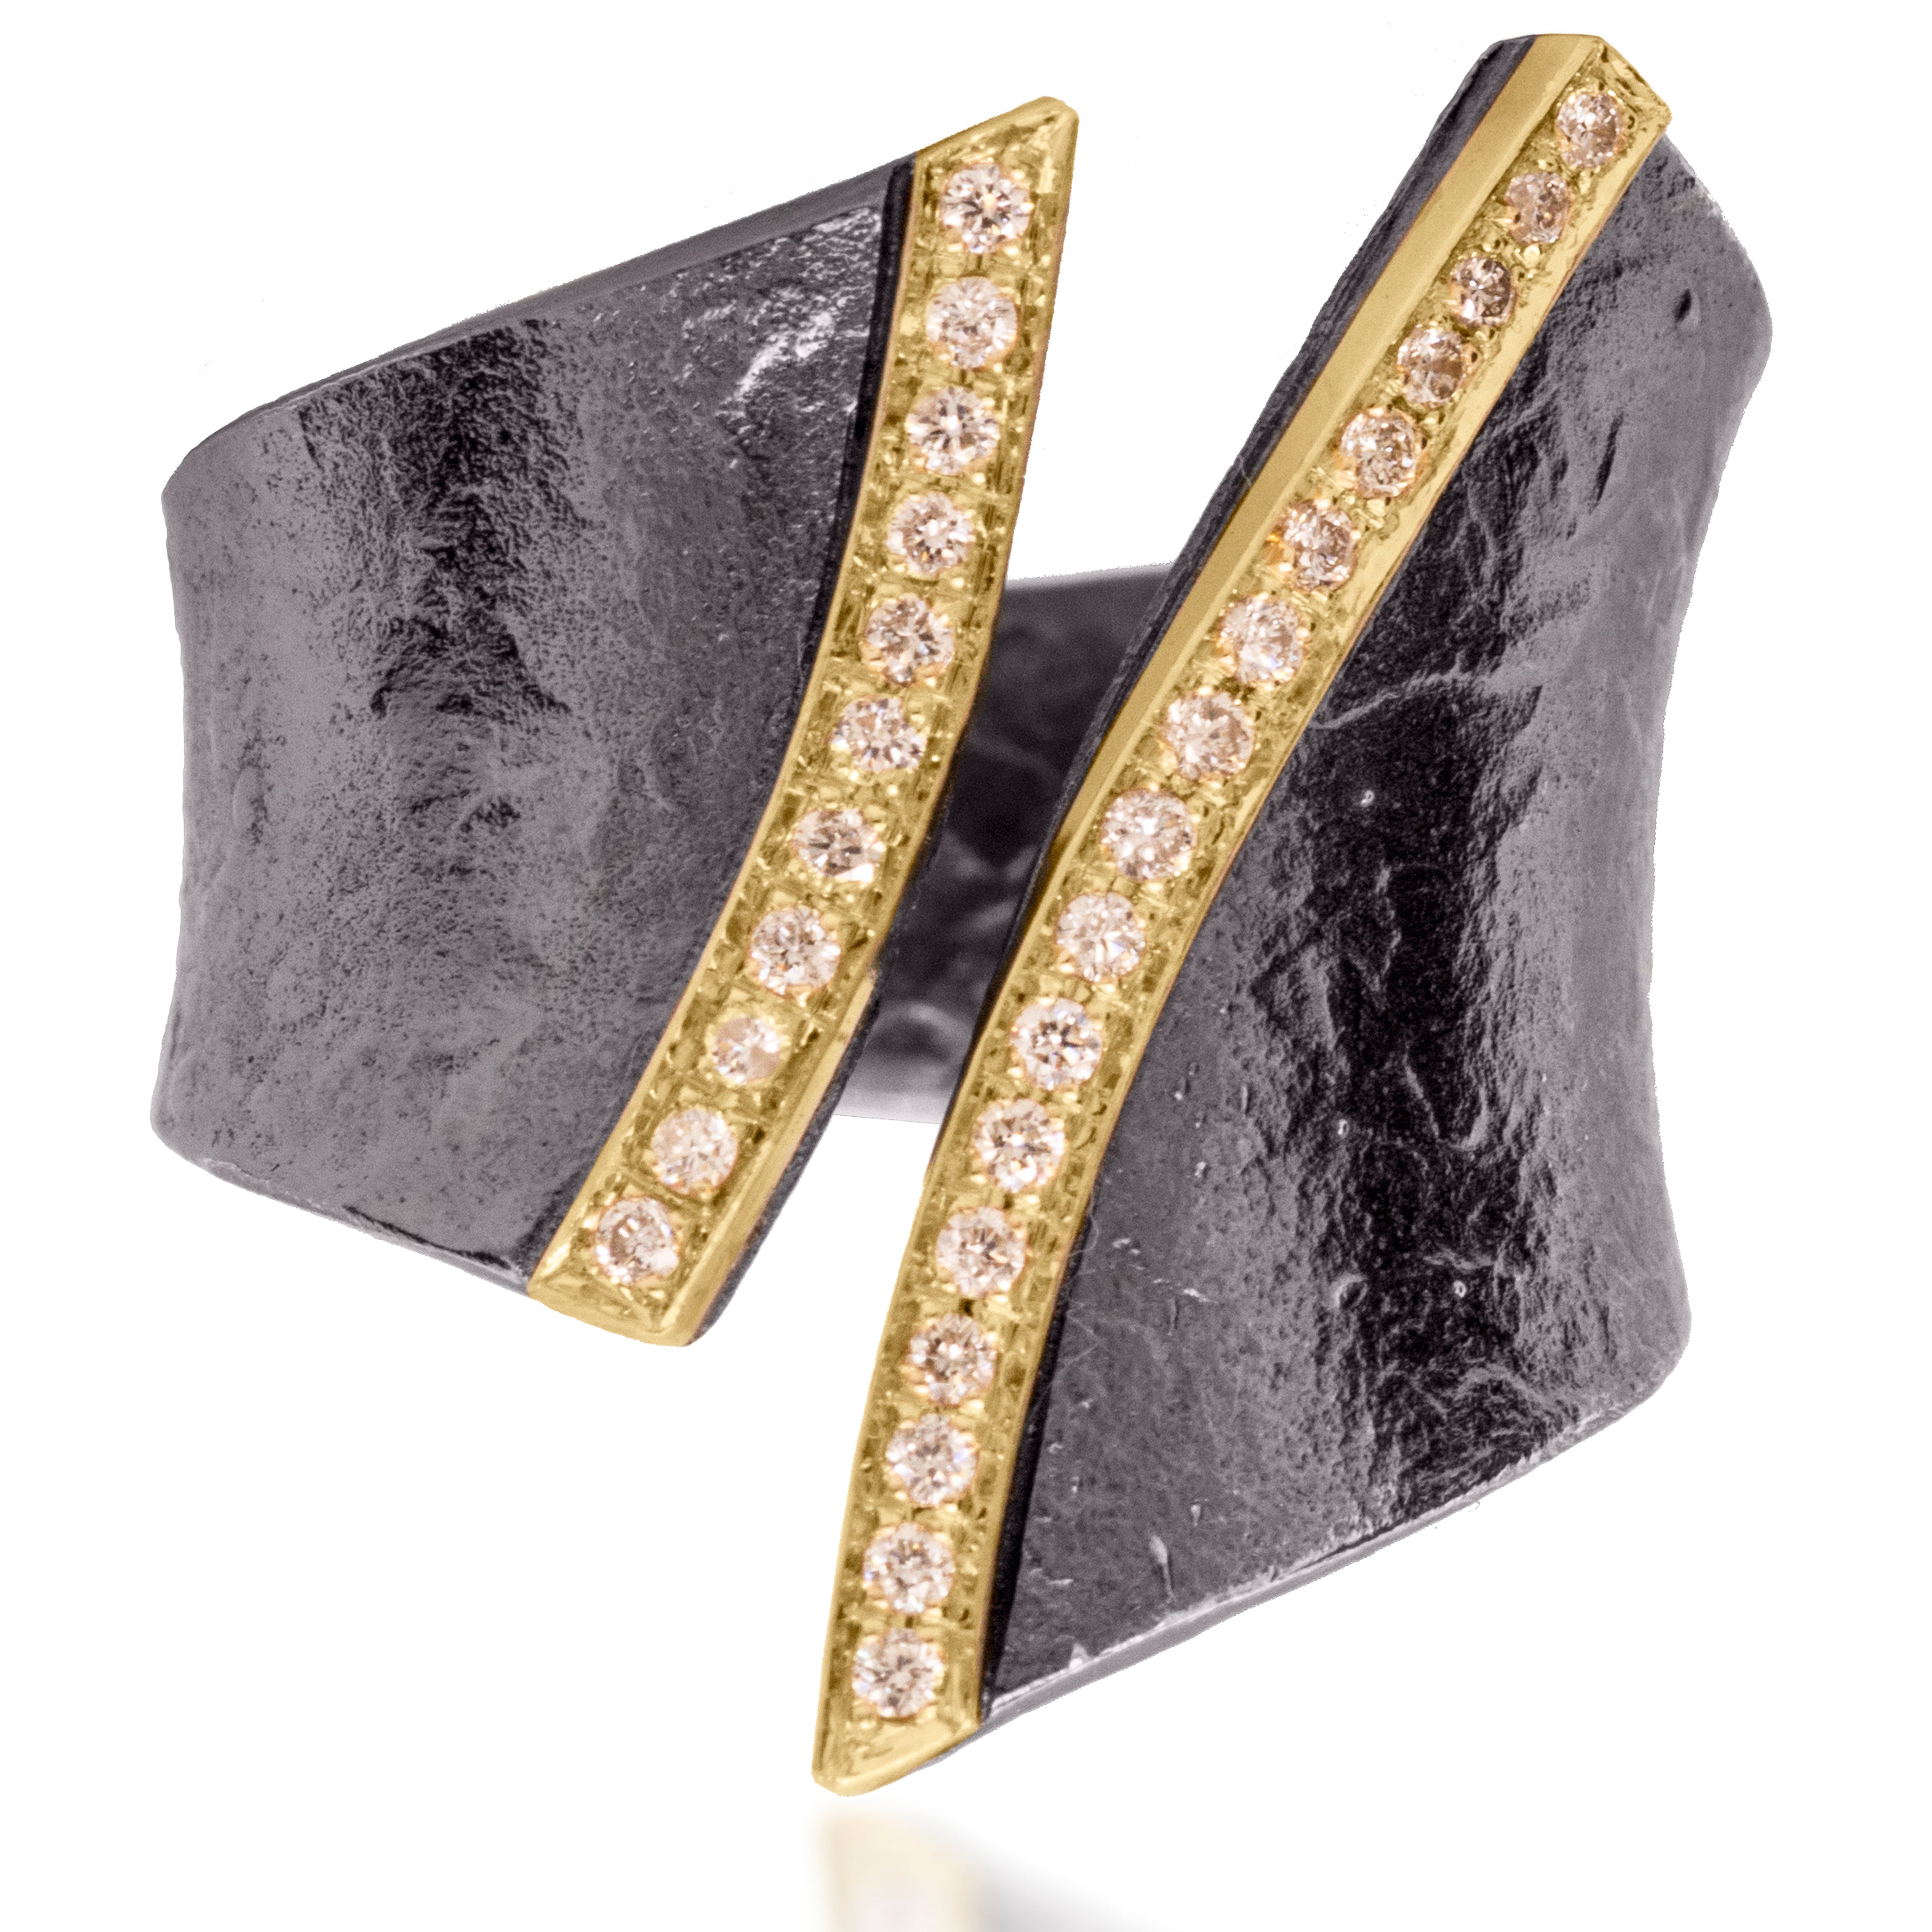 A fresh, modern classic combining earthy textured metals with true bright cut pavé. Hand forged and fabricated in 18k gold and oxidized sterling silver with pavé set white diamonds. As shown, 0.166 tcw. | Elizabeth Garvin Fine